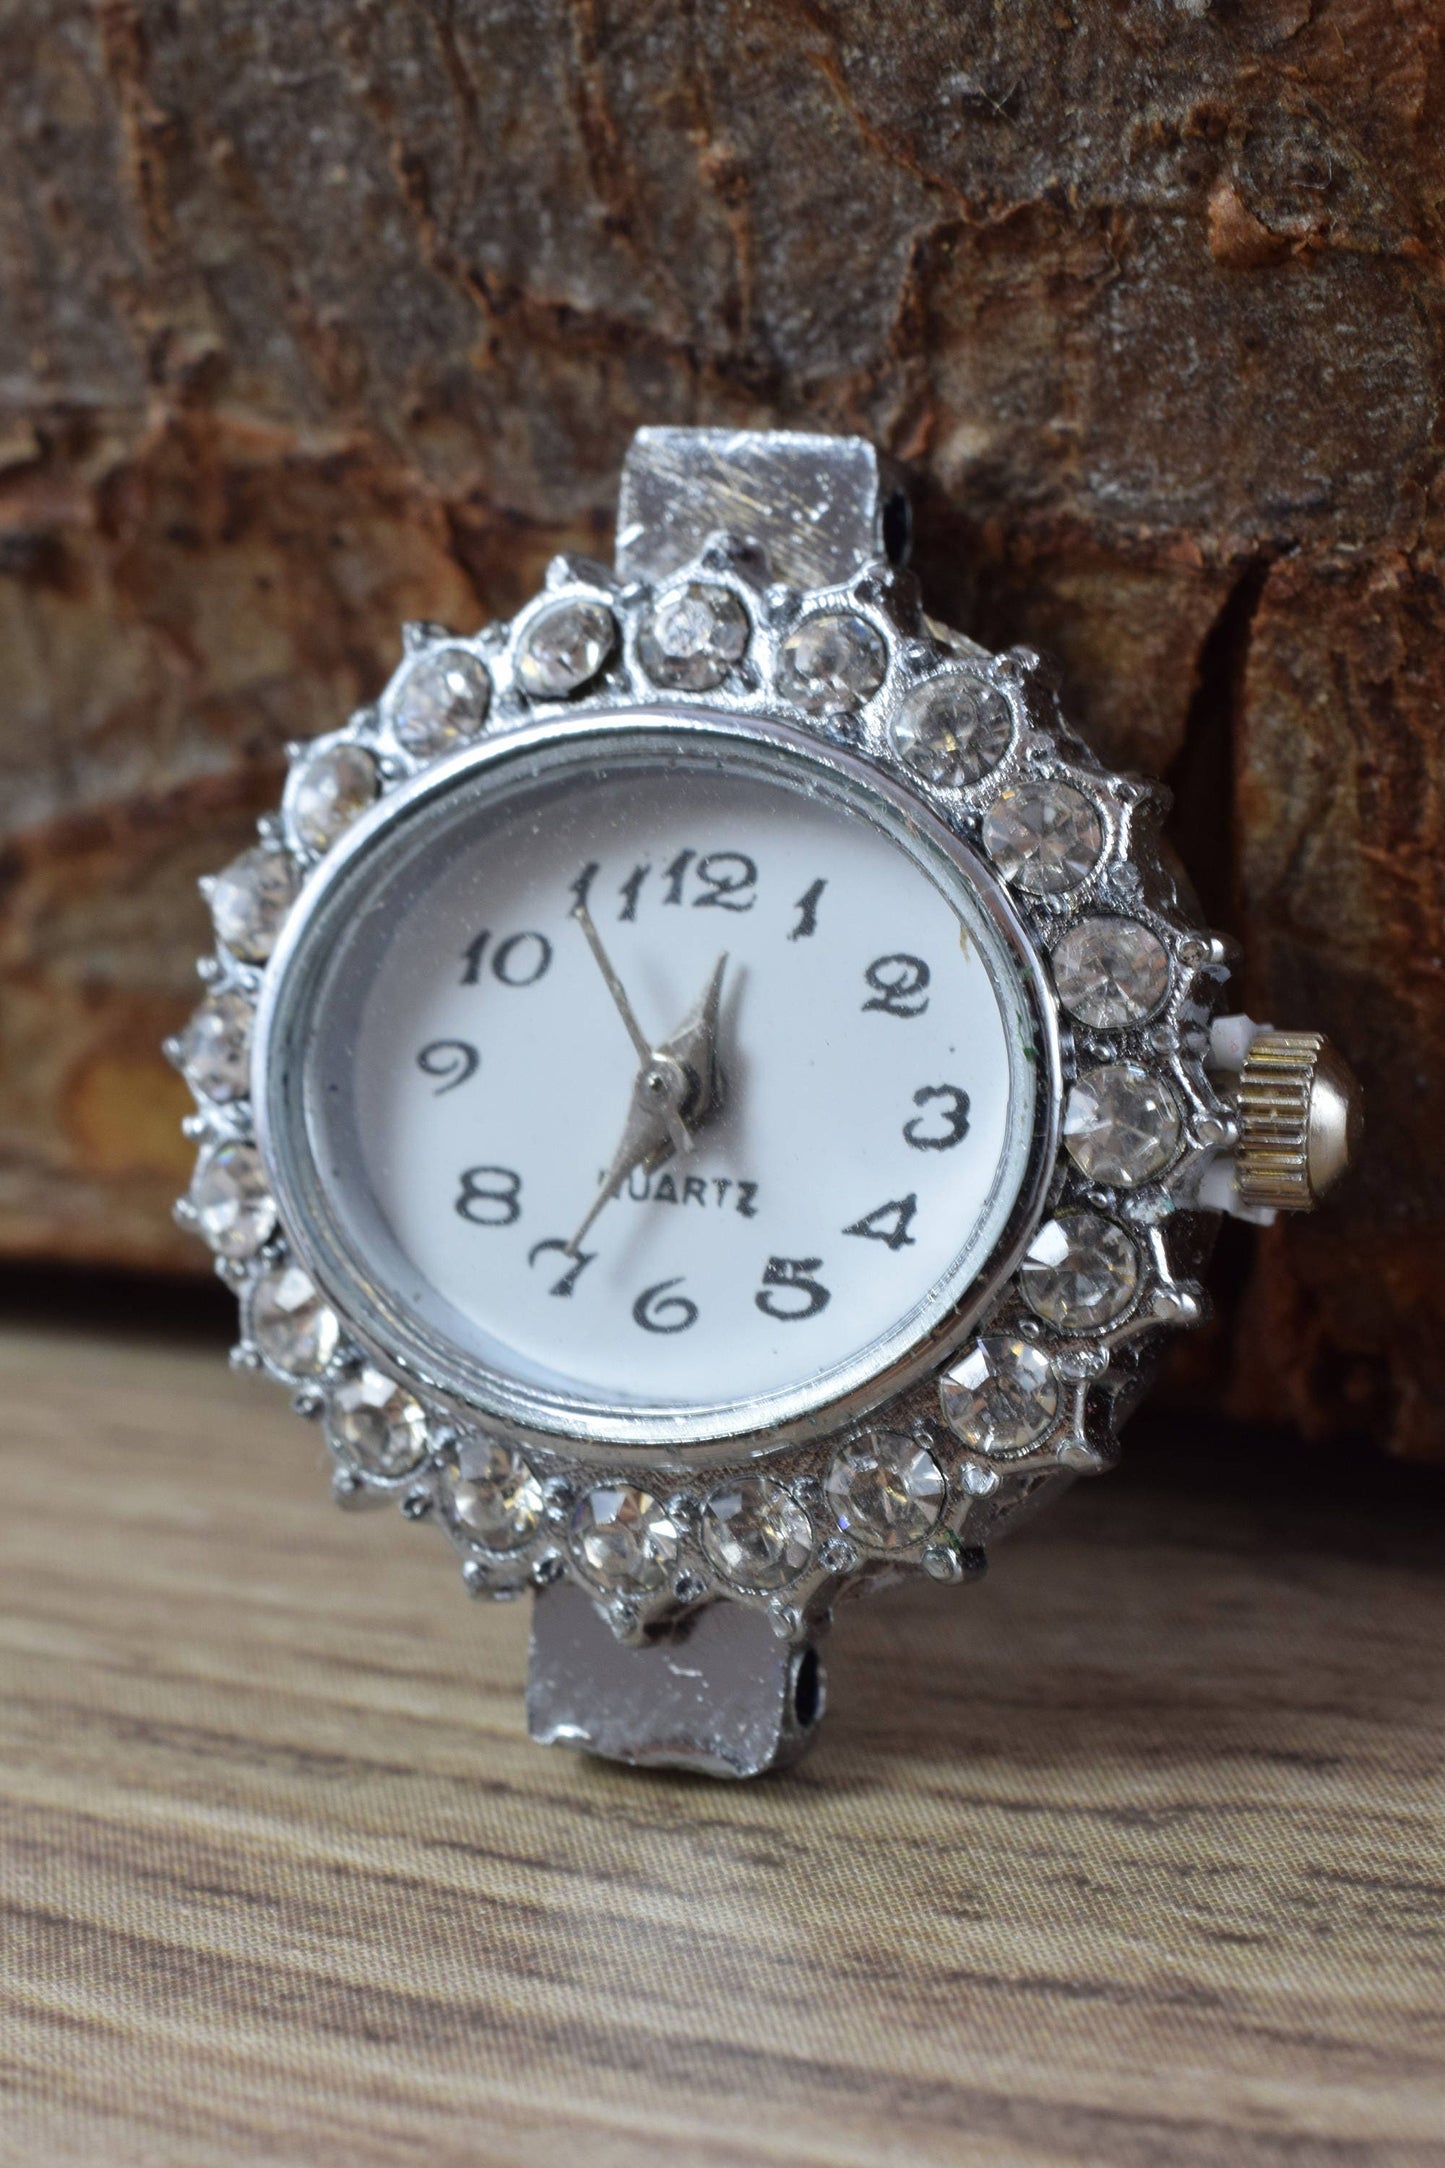 Mixed Sizes Silver Plated Antique Style Watch Face,Rhinestone Encrusted Watch Face, Unique Watches, Round Watch Face,Silver Watch Face